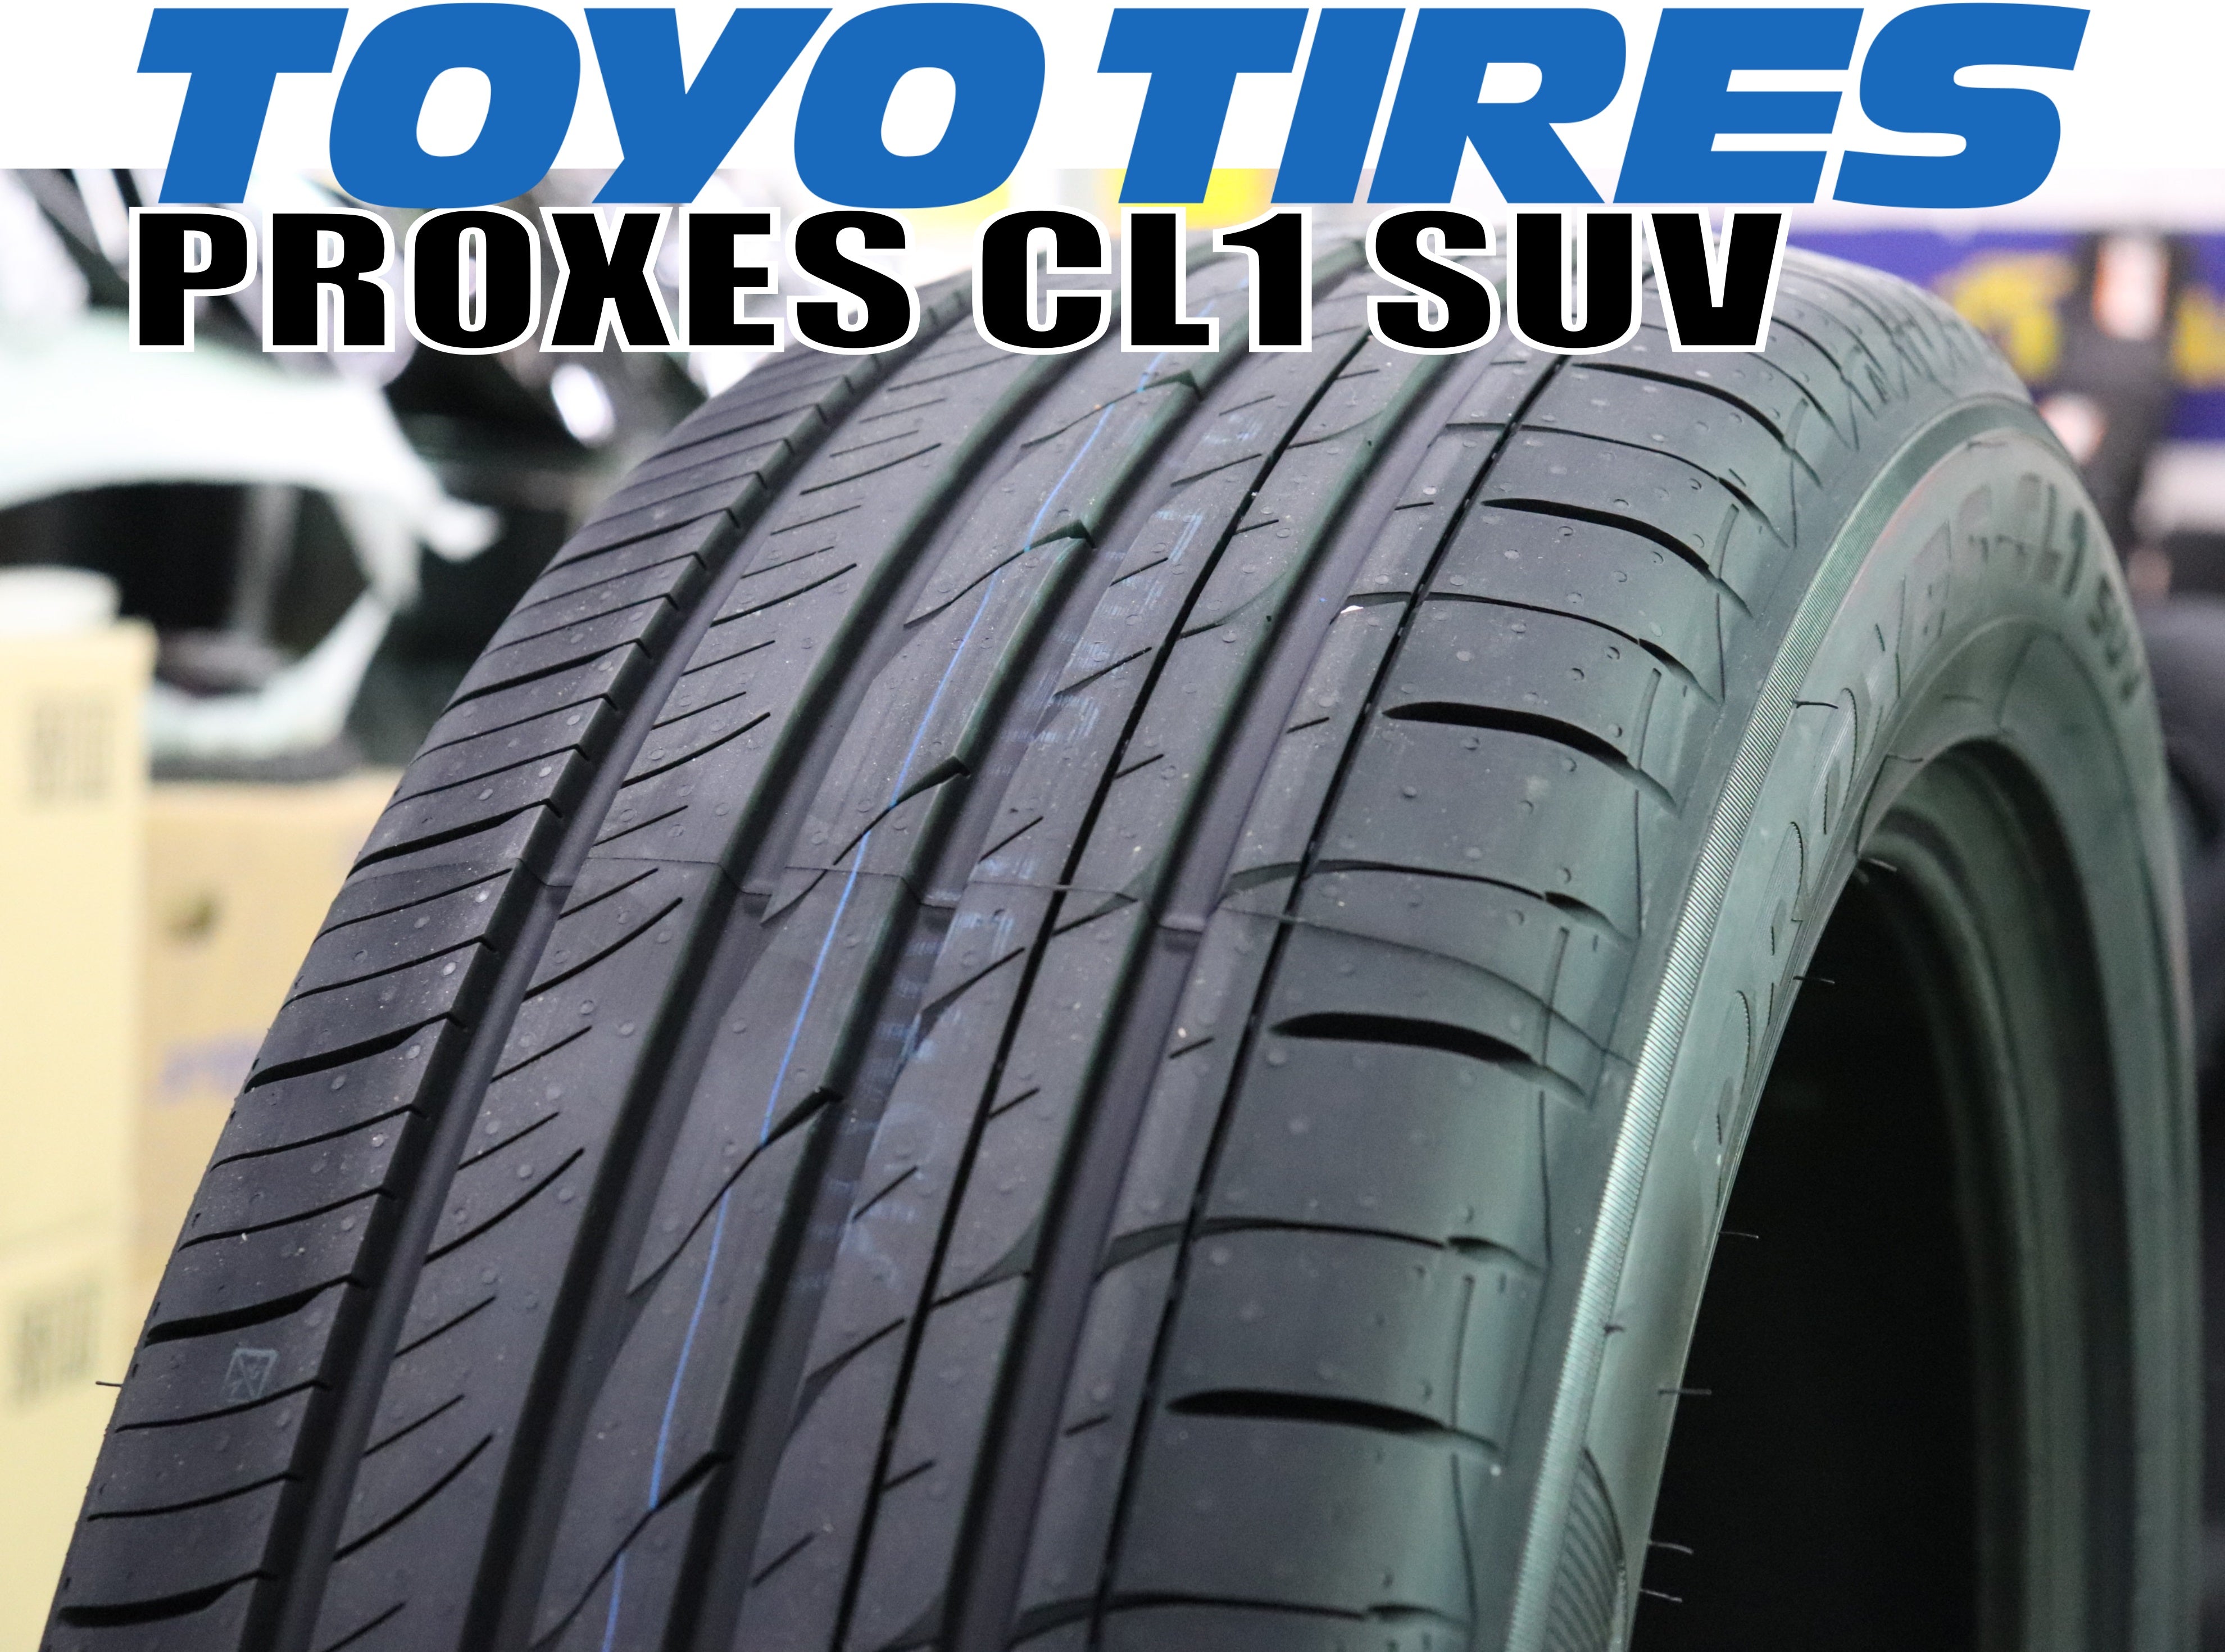 TOYO TIRES PROXES CL1SUV（トーヨー プロクセス） 235/55R17 99V 235/55-17